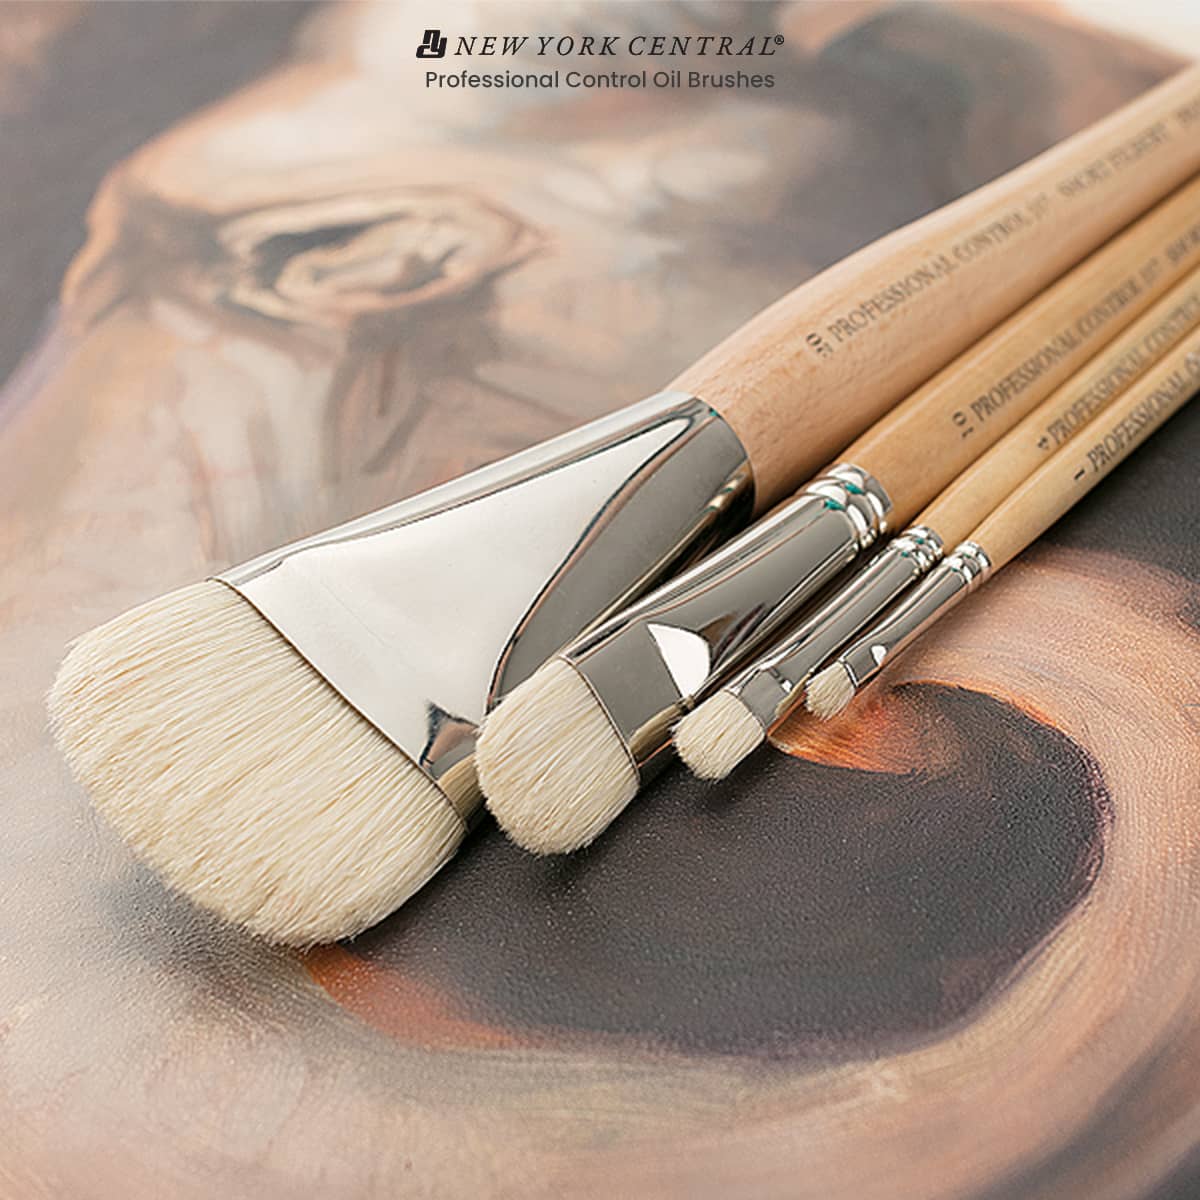 Bob Ross Oil Painting Brushes and Knives